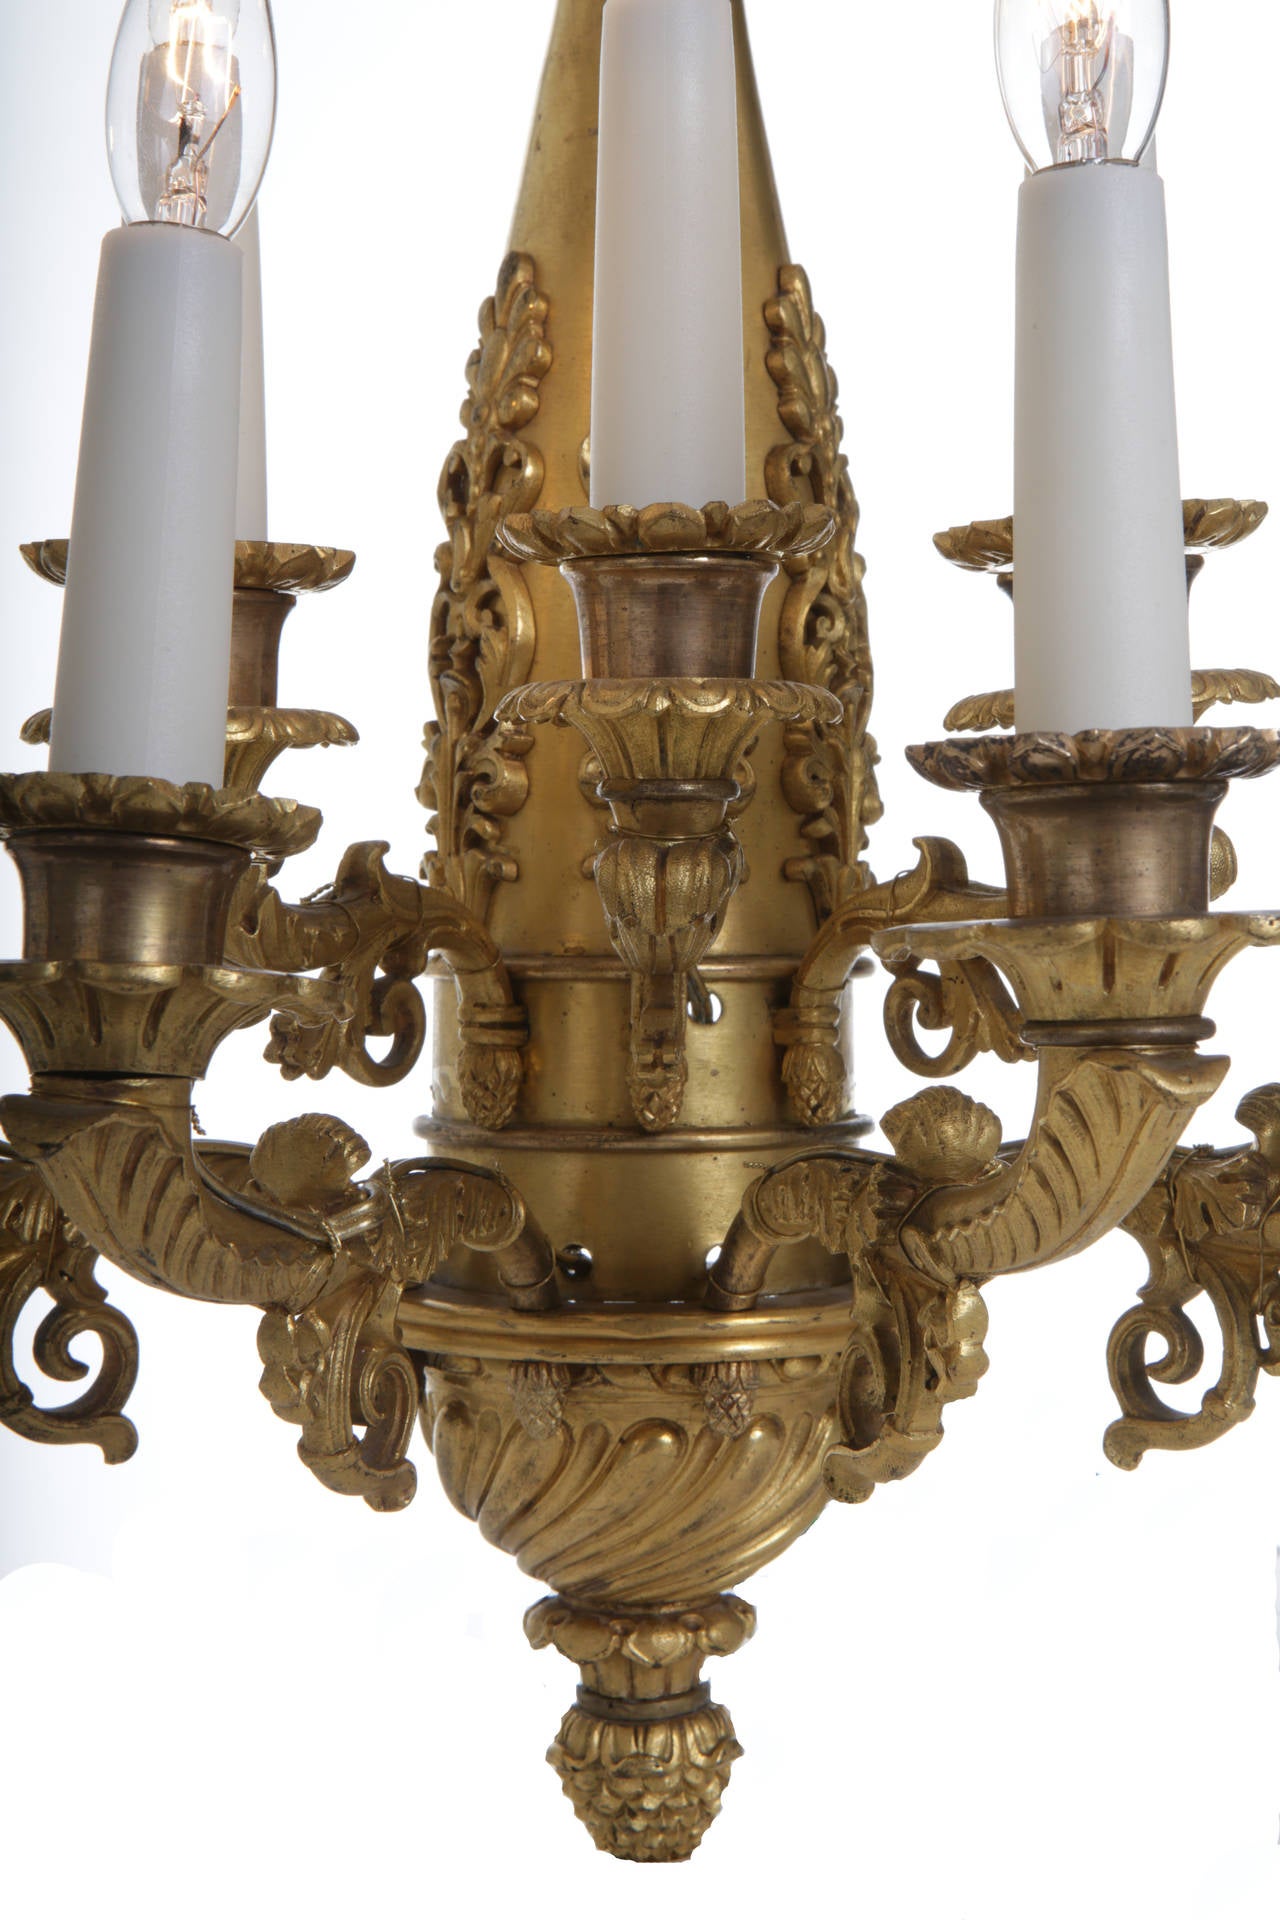 A rare pair of Charles X ormolu bronze seven branch wall lights in the Empire Revival style. Exclusive mercury gilding and lately electrified.